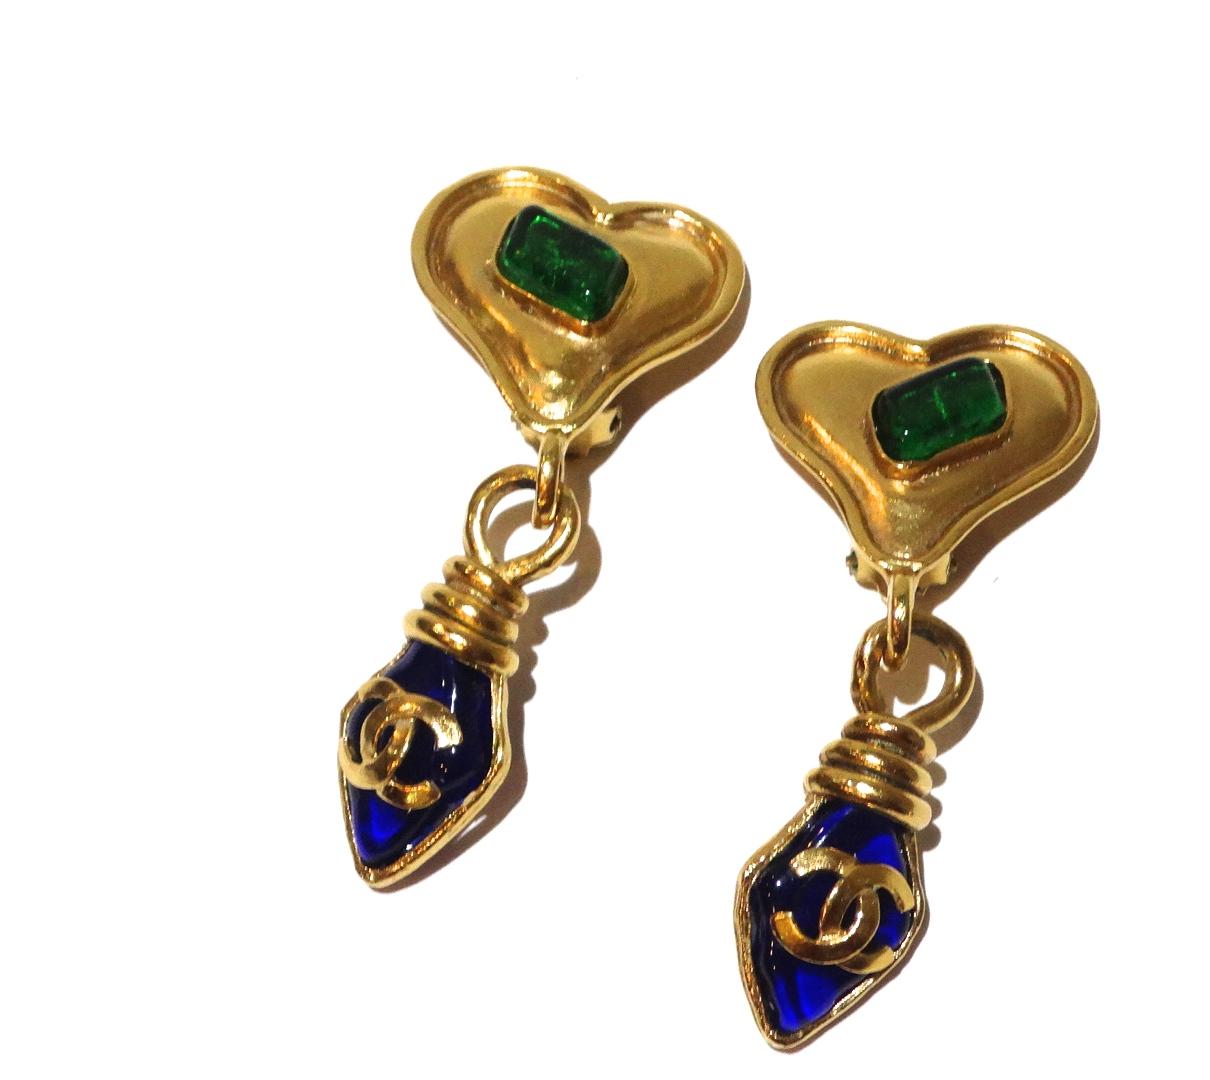 The dreamiest pair of Chanel drop earrings from Lagerfeld-era 1995 spring collection! Abstract heart shaped charms with green 